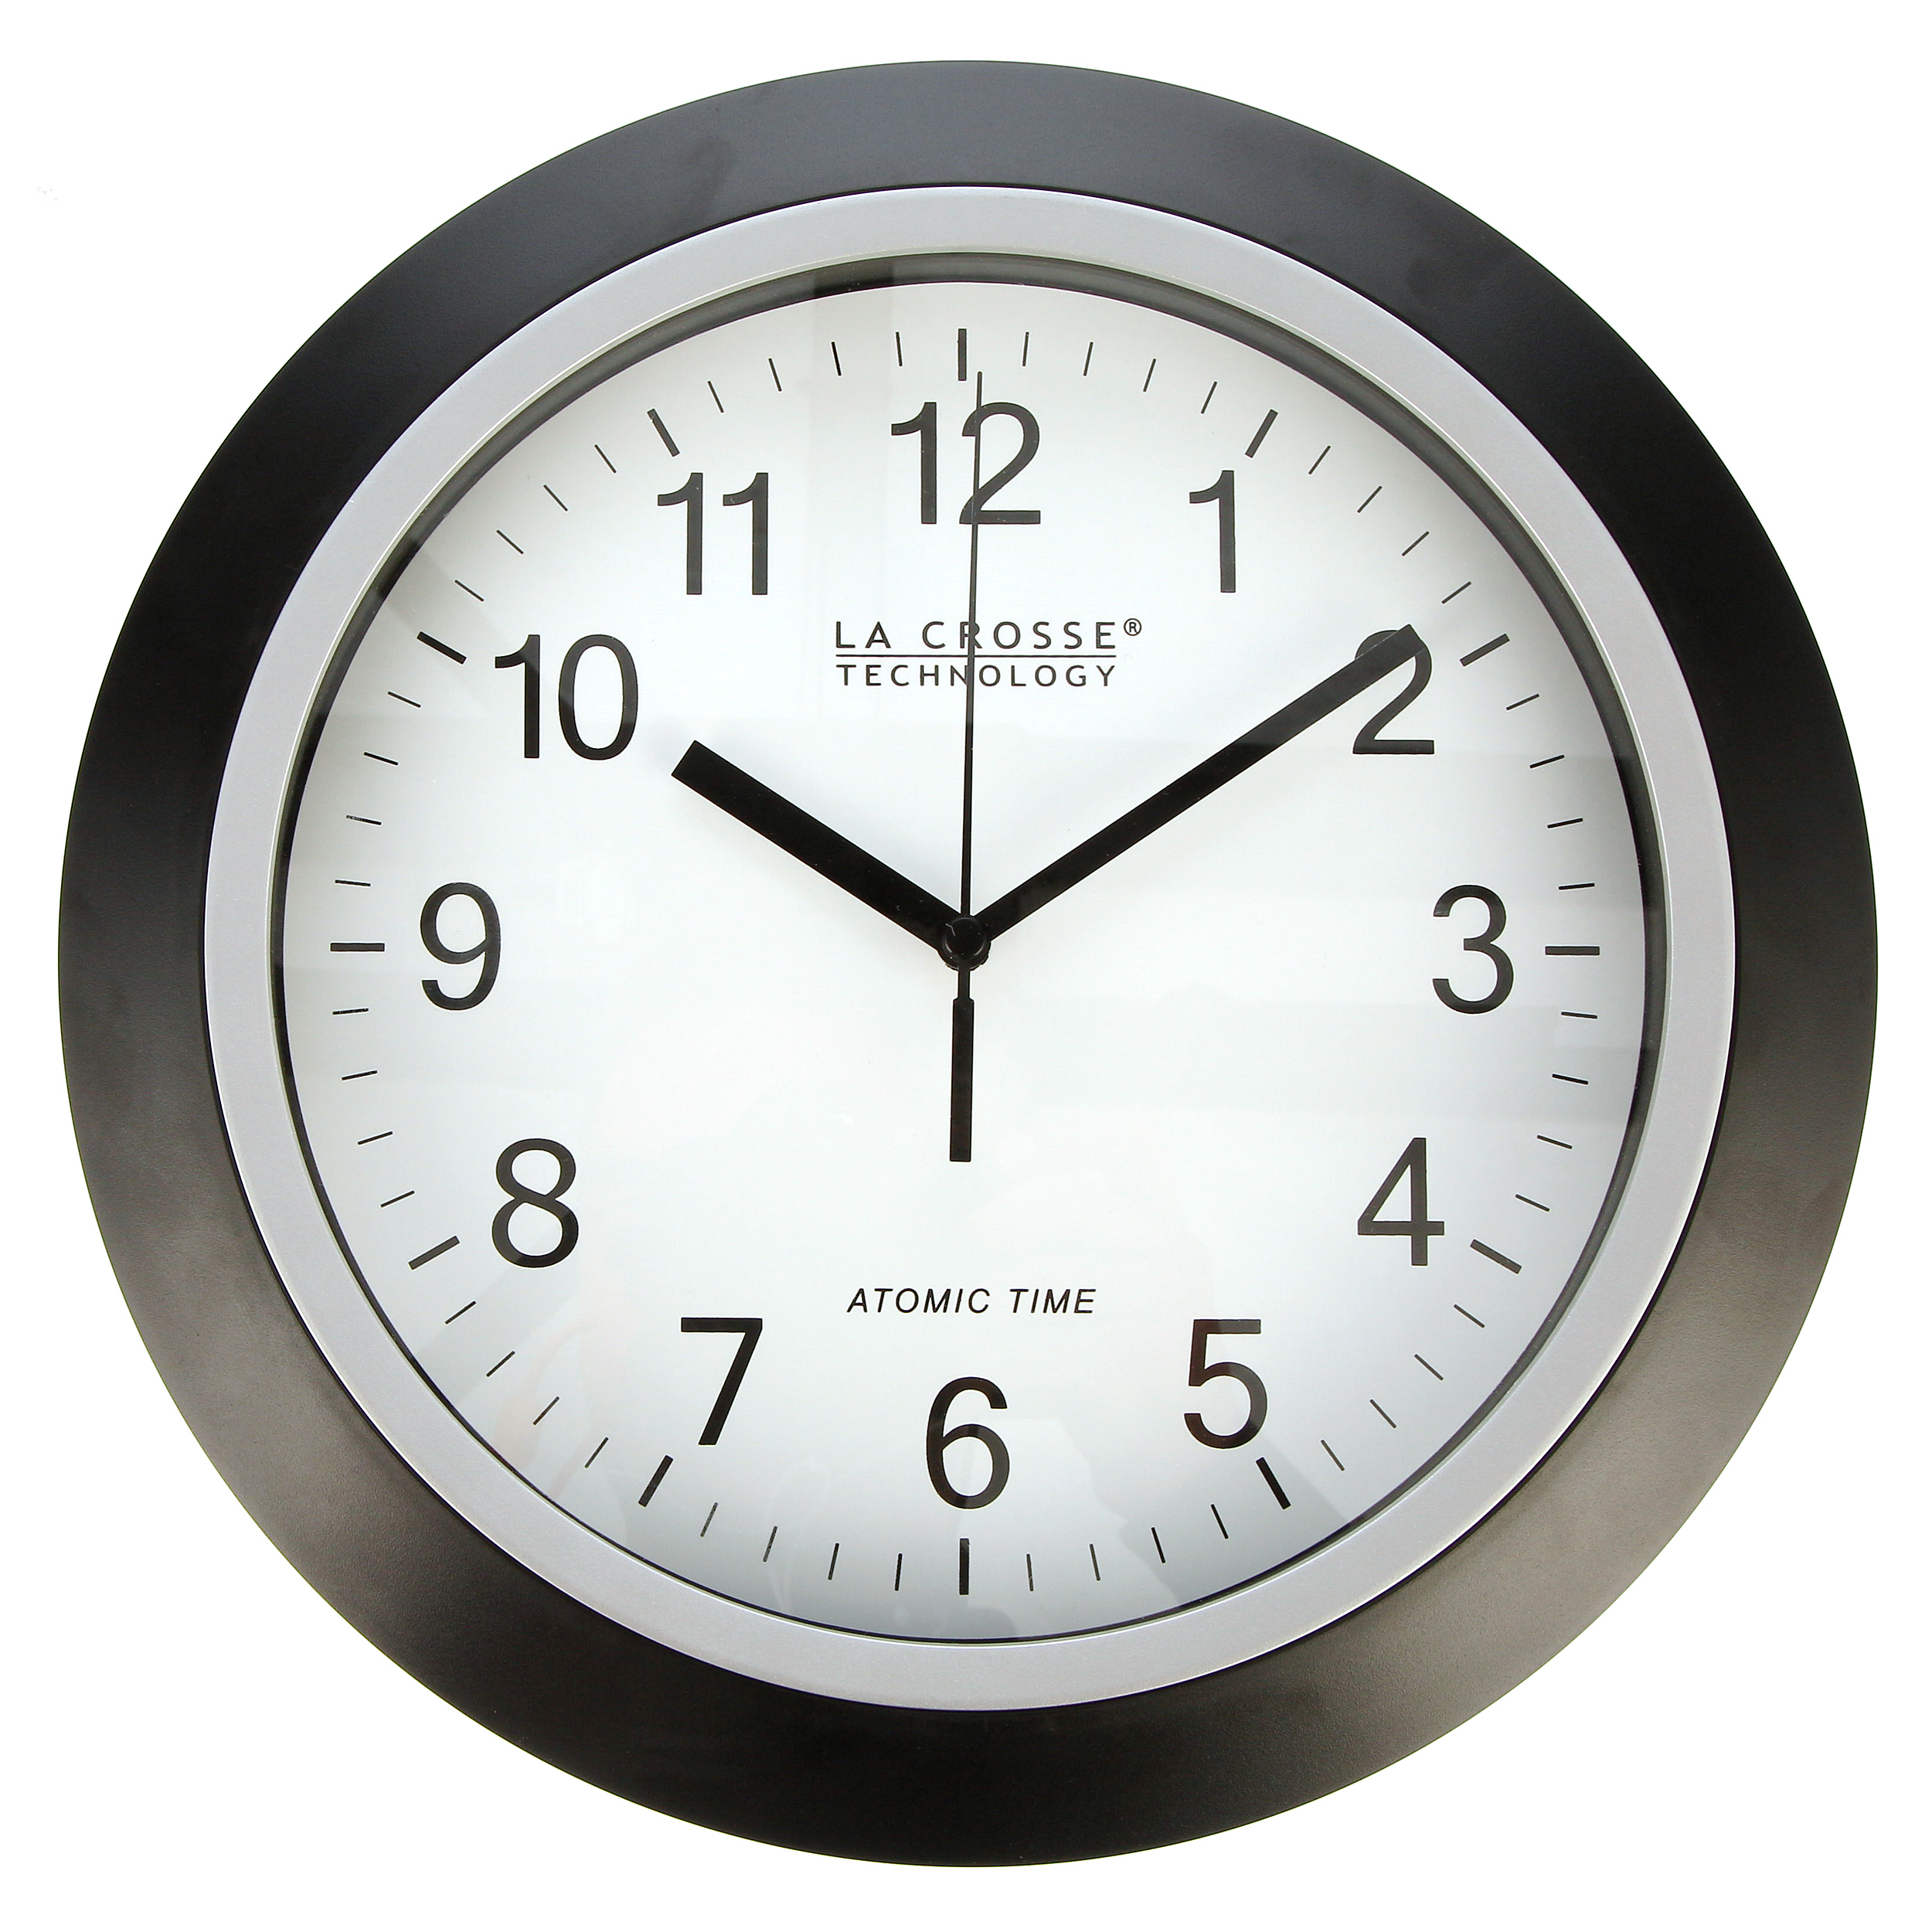 Better Homes & Gardens 12 Inch Analog Atomic Black Wall Clock, model W85961 - image 1 of 5